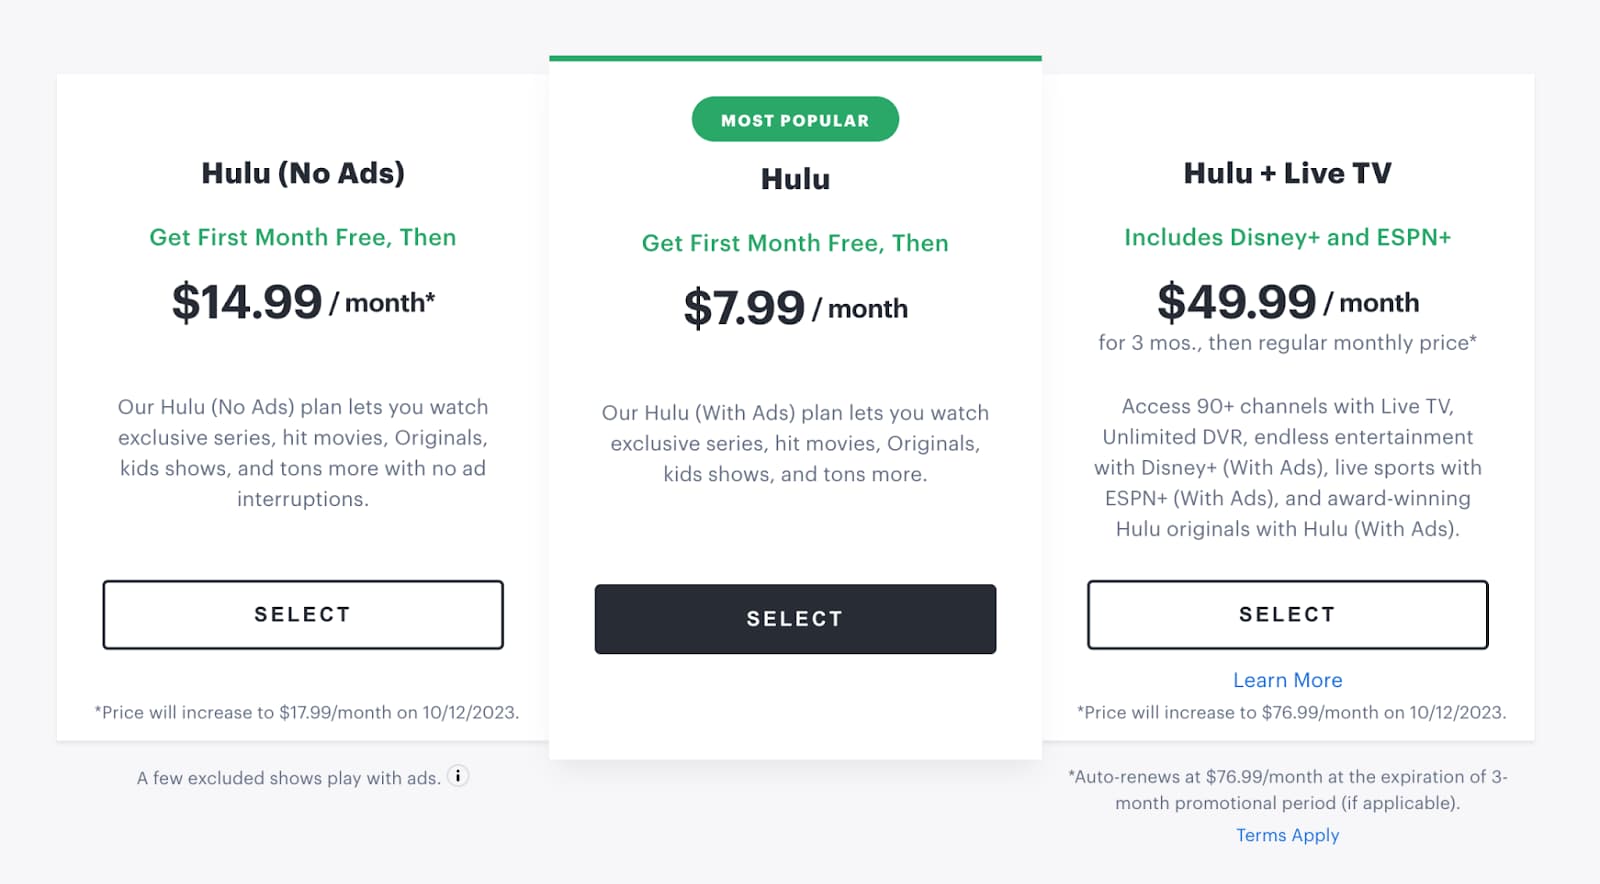 Hulu's different subscription plans